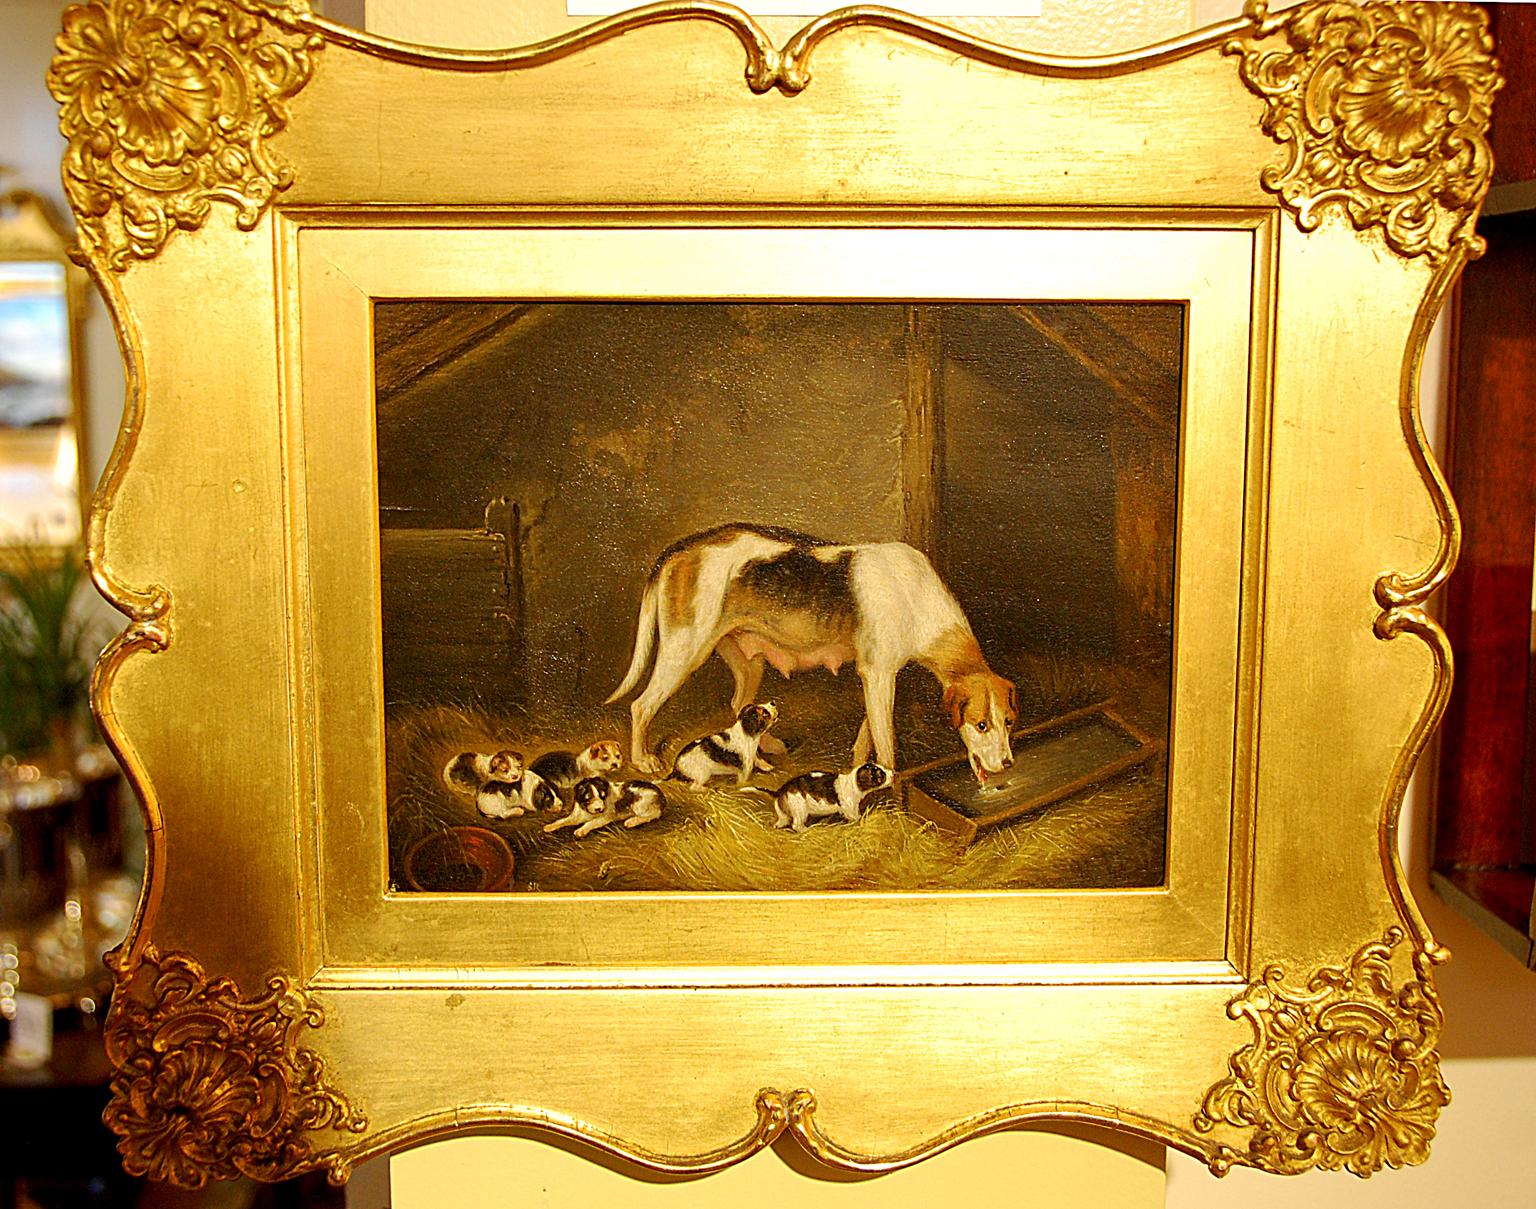 English pair of signed Samuel Raven oil paintings on panel of hound dogs. One is of a female hound and her puppies in a barn, the other is a pair of hound dogs running in a landscape; 